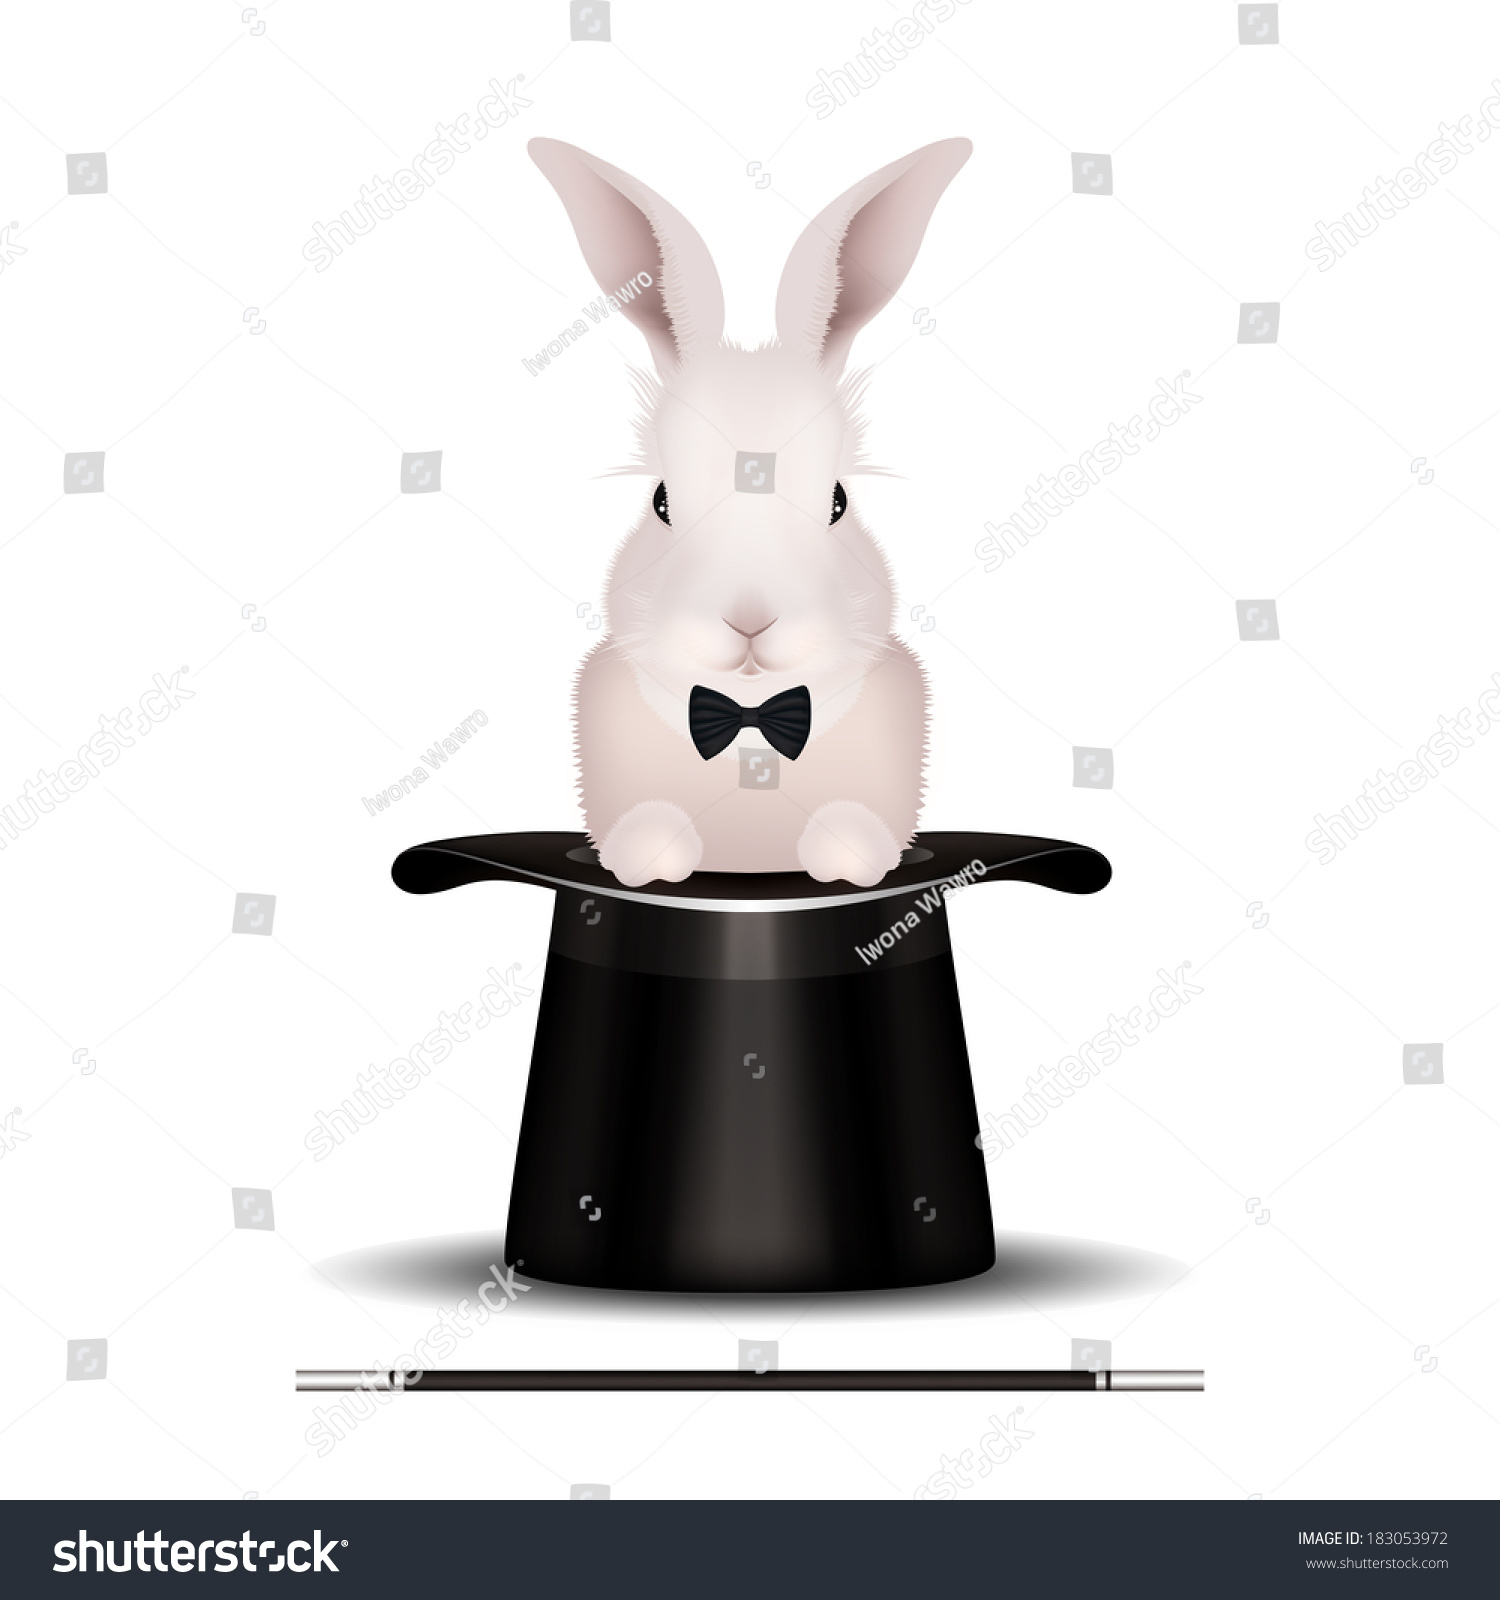 Easter Bunny Rabbit Magic Hat Isolated Stock Vector 183053972 ...